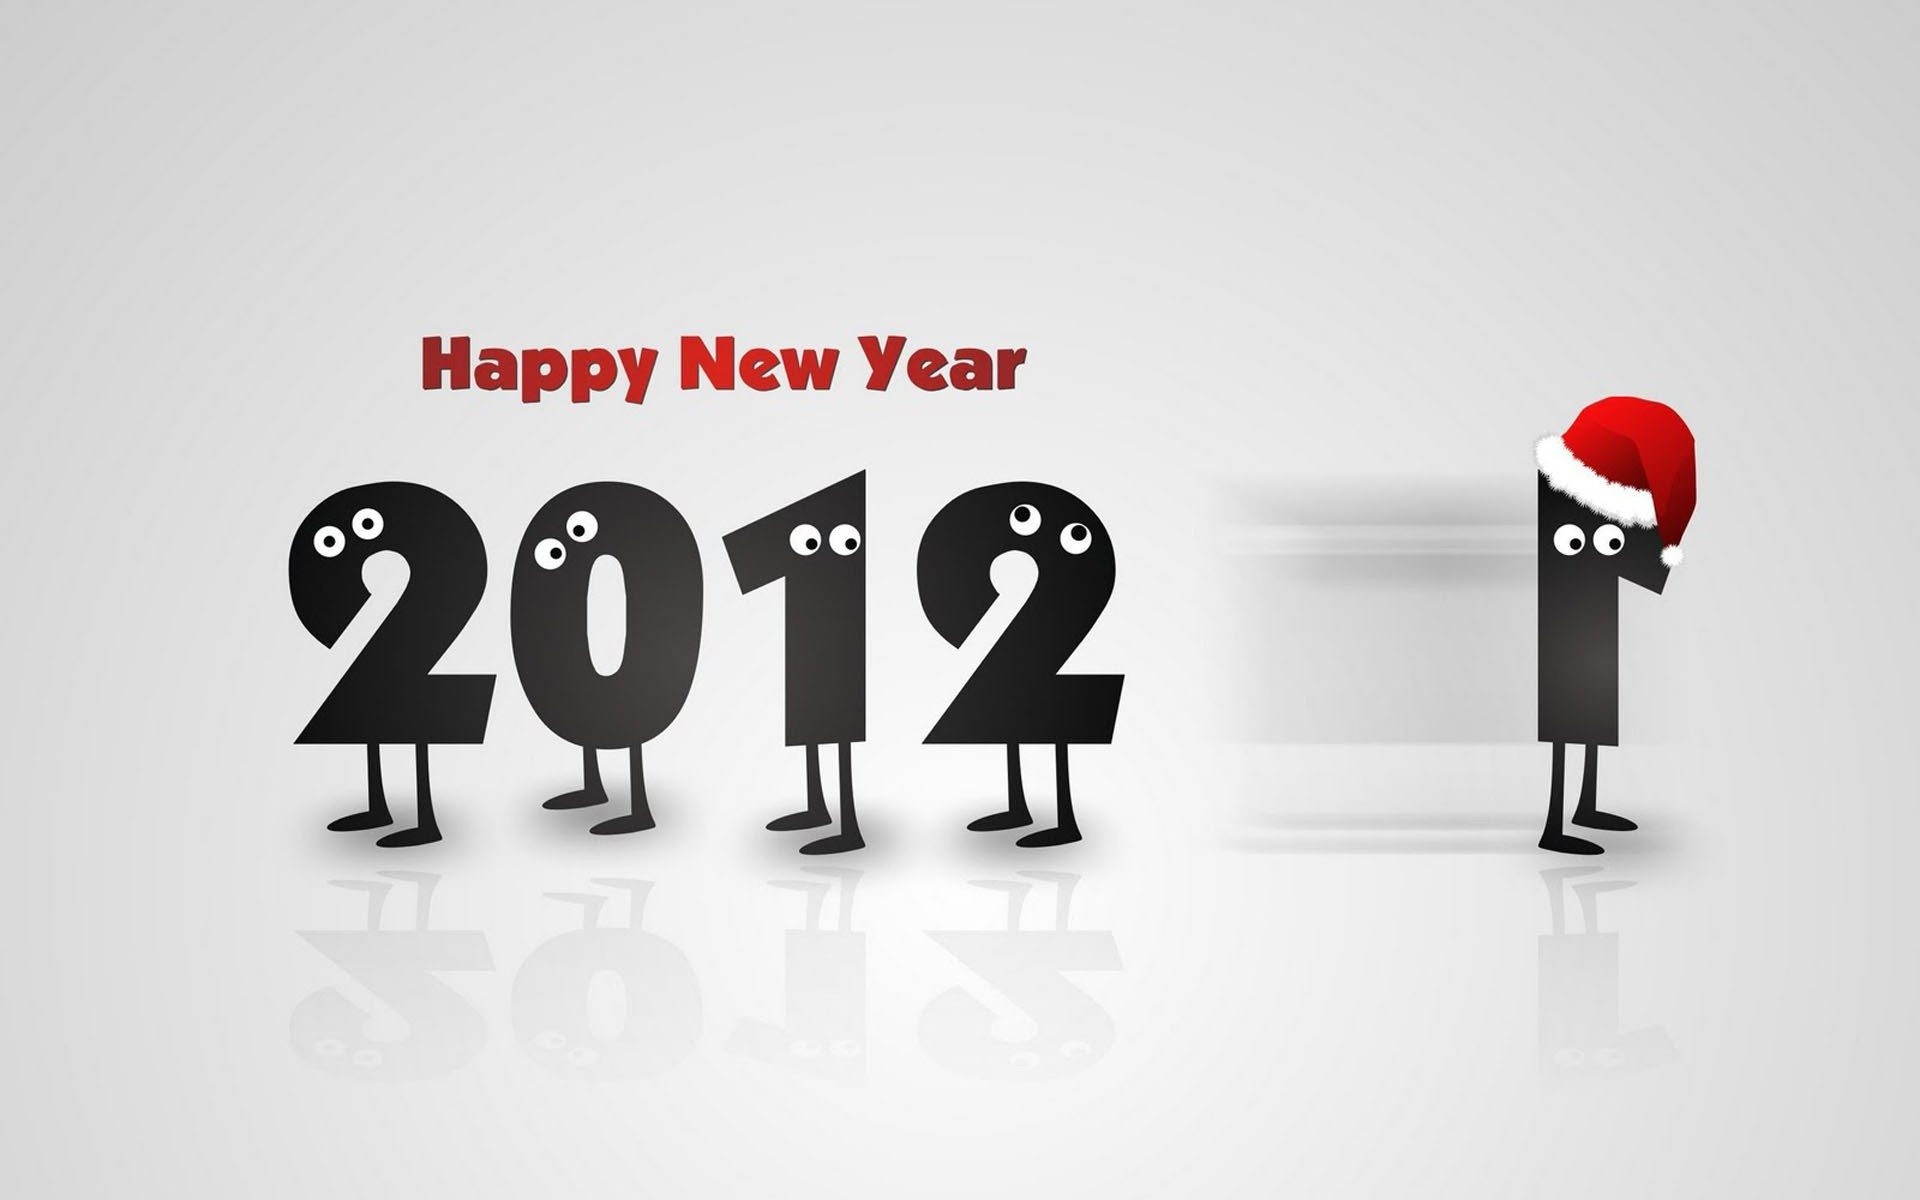 2012 New Year wallpapers (2) #19 - 1920x1200